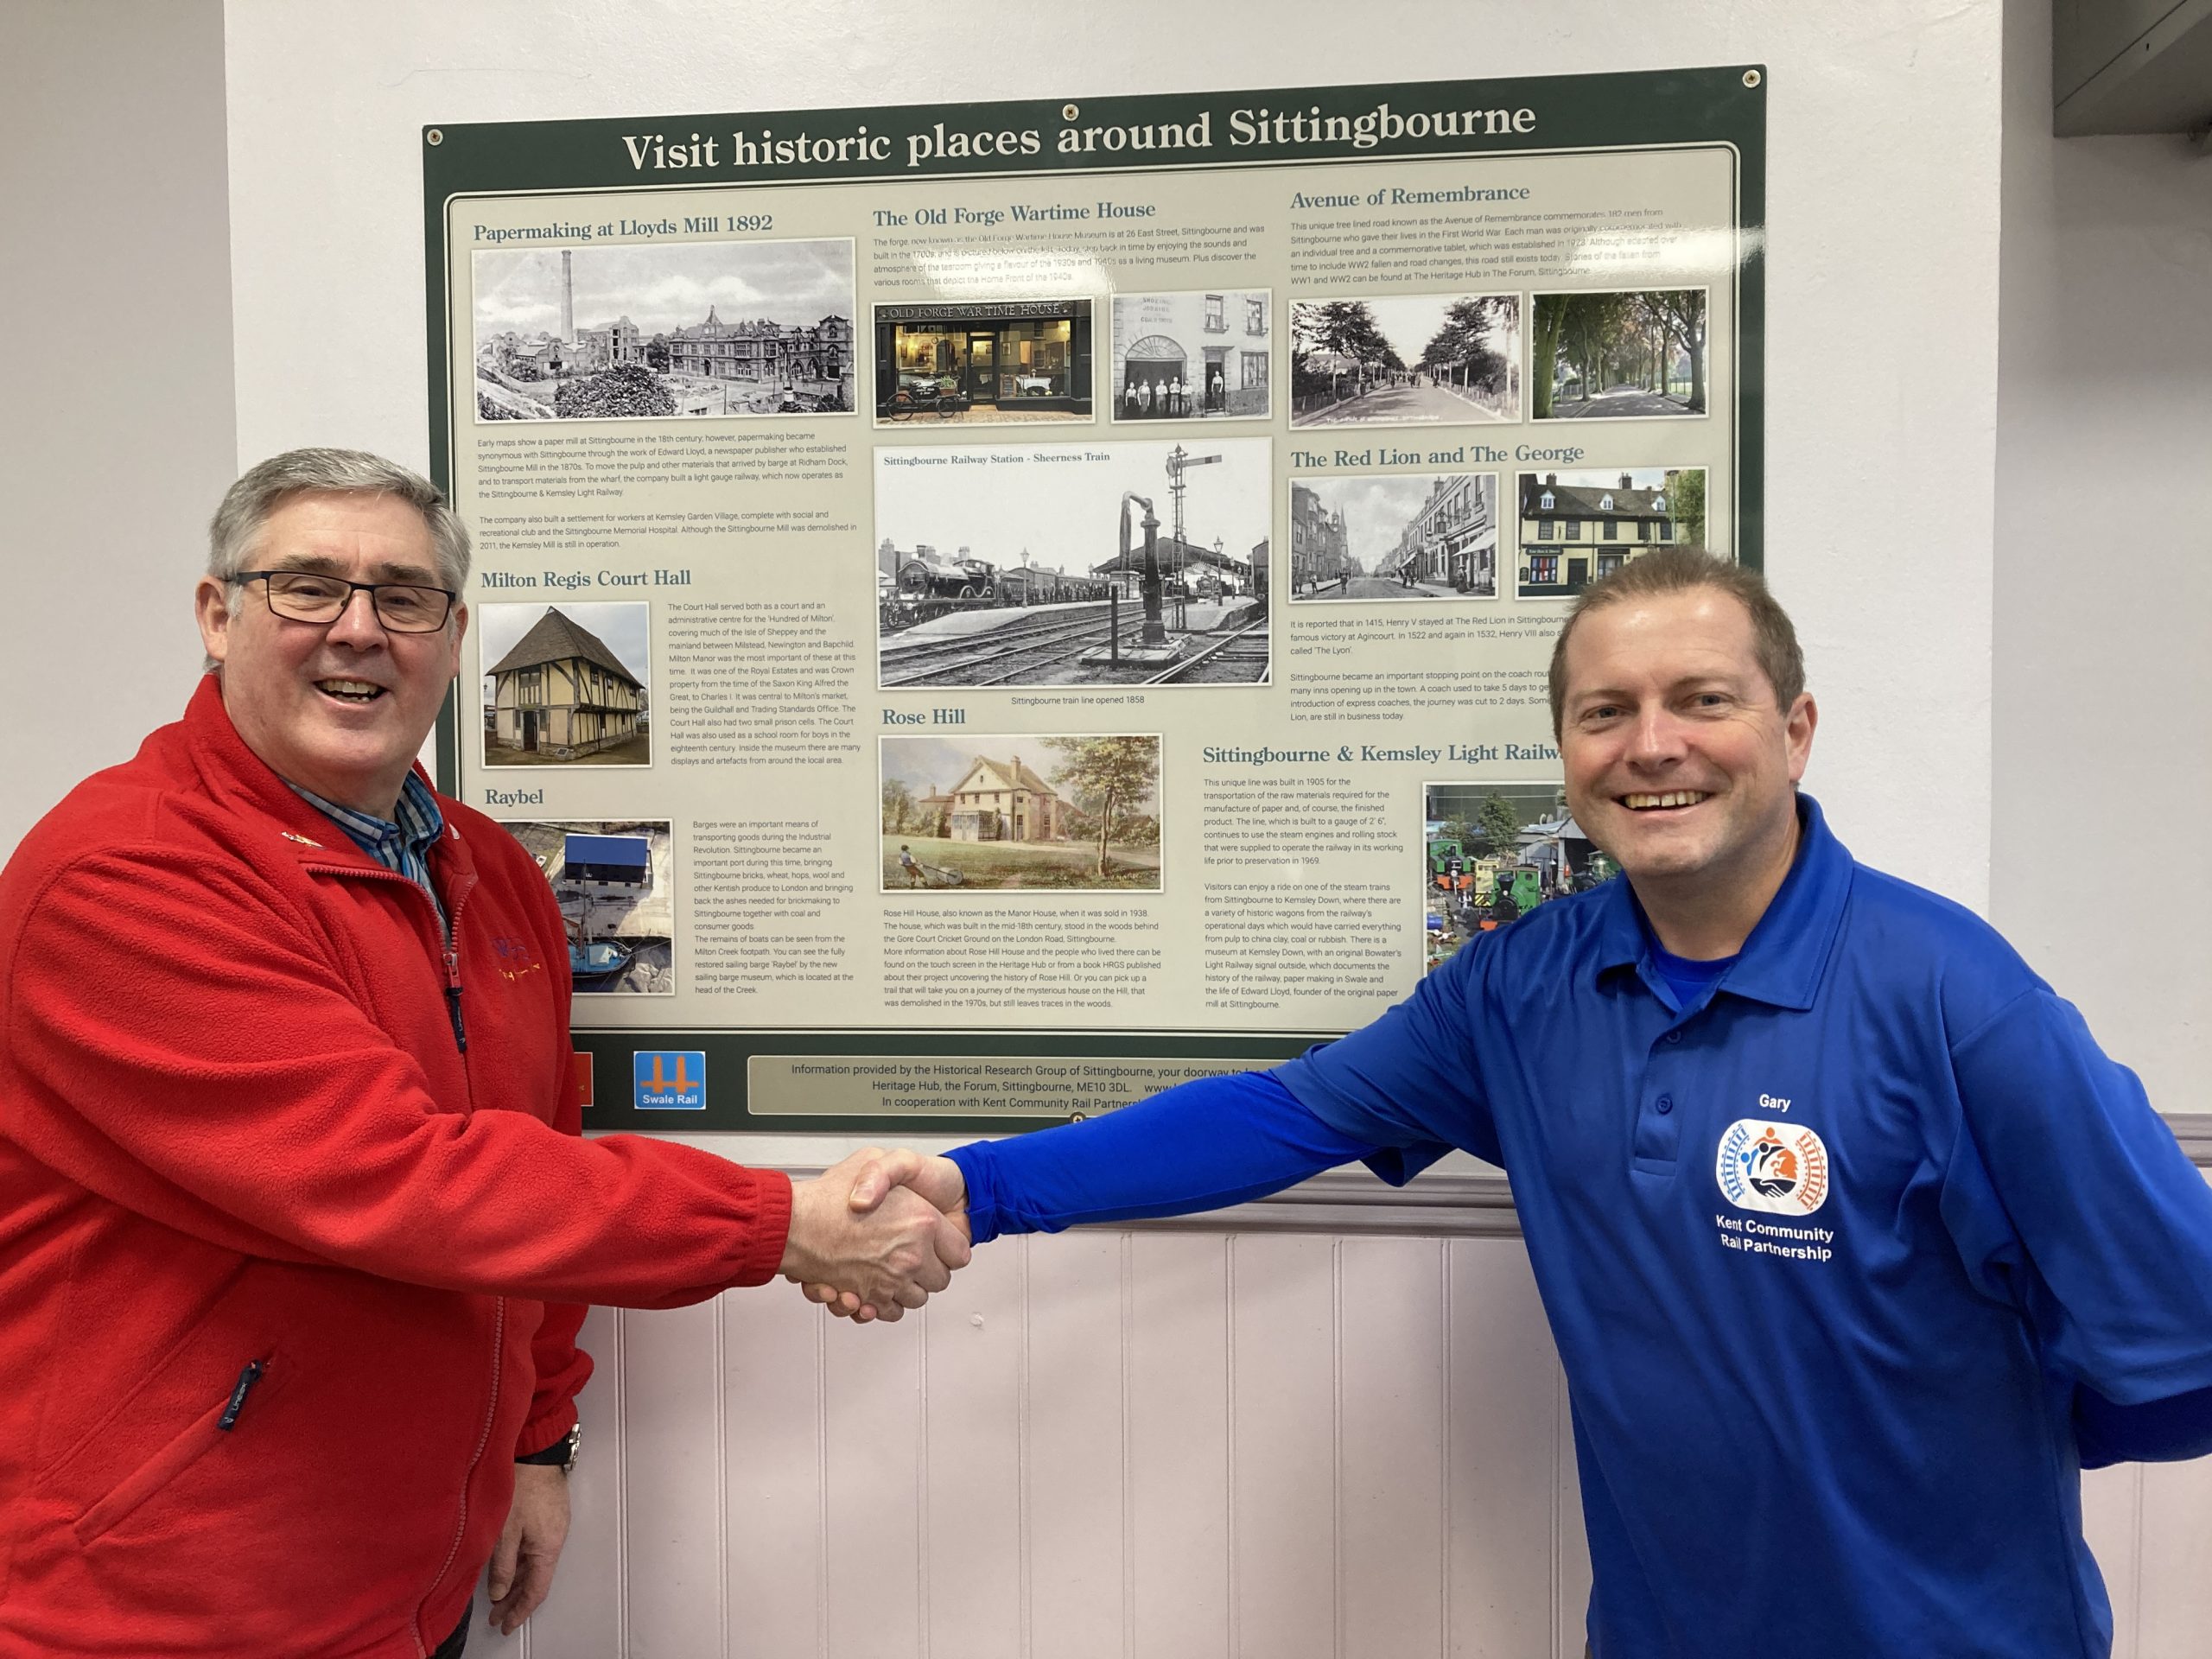 Richard Emmett (wearing red) and Gary Outram (wearing blue) smiling and shaking hands in fromt of the local history board in the waiting room.